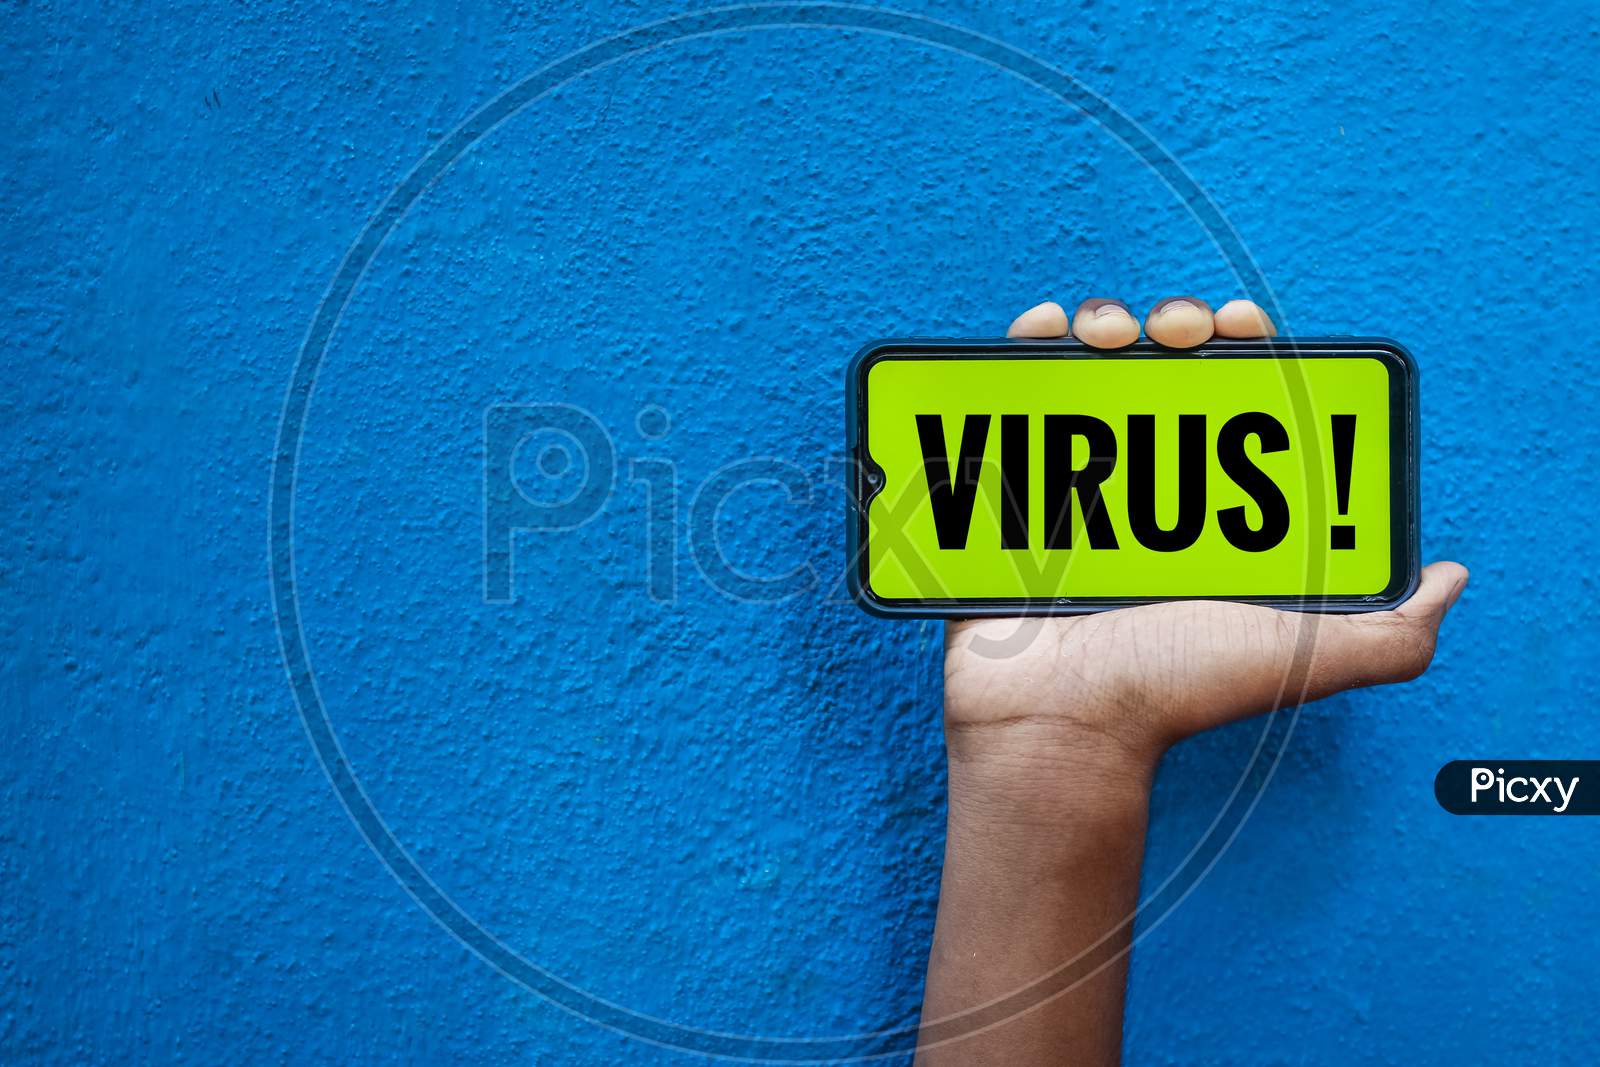 Virus / Covid-19 Wording On Smart Phone Screen Isolated On Blue Background With Copy Space For Text. Person Holding Mobile On His Hand And Showing Front Of The Screen For Corona Virus Wording.